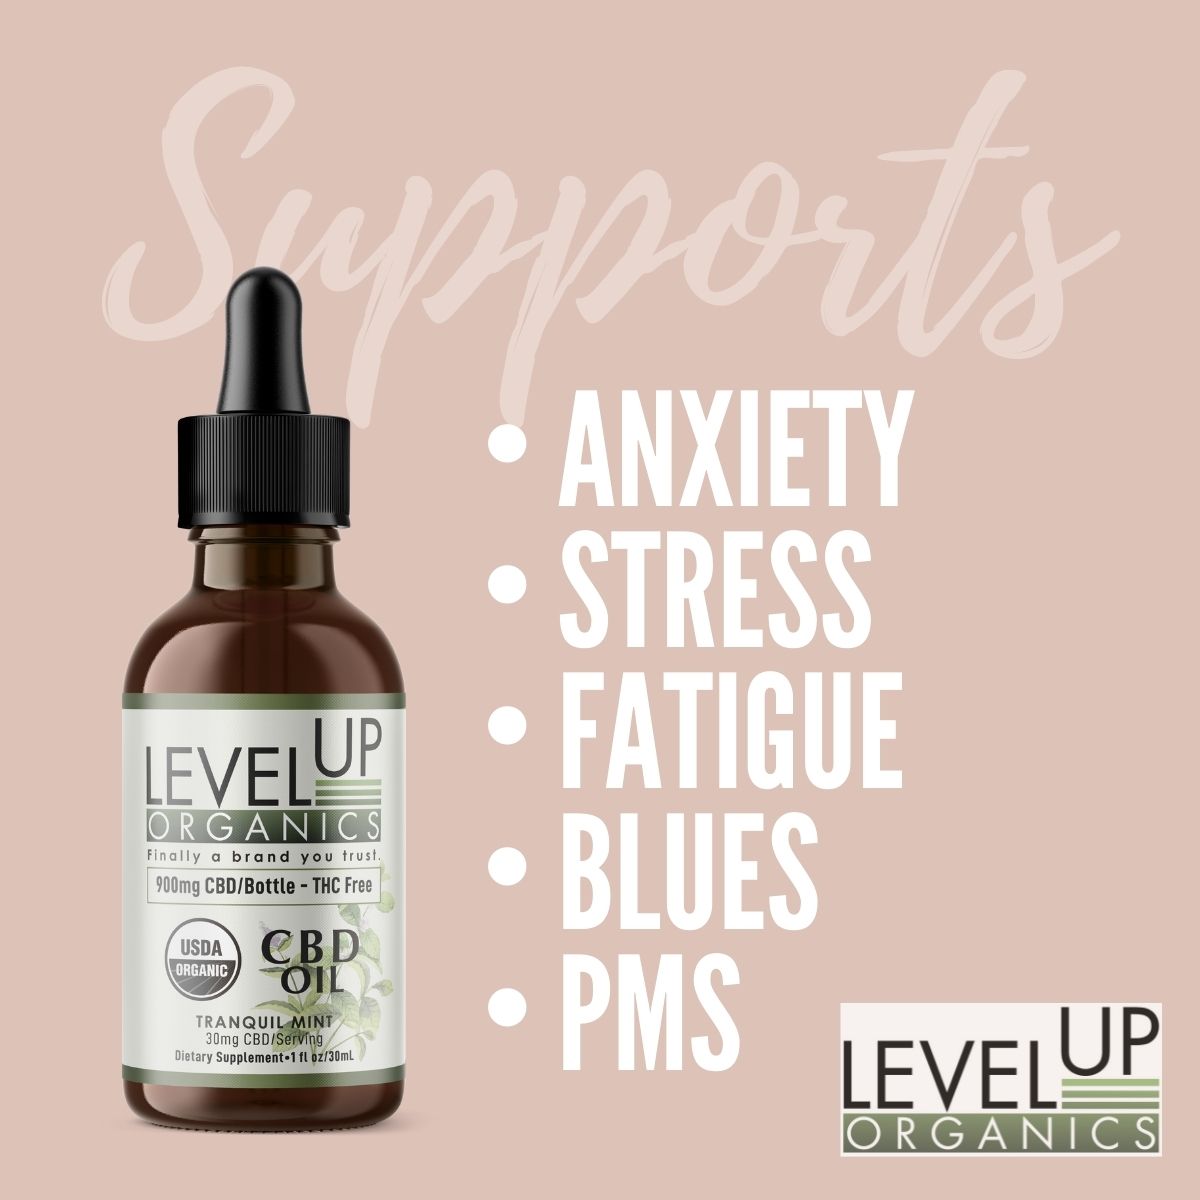 Level Up Organics CBD Oil Supports Anxiety, Stress, Fatigue, Blues and PMS